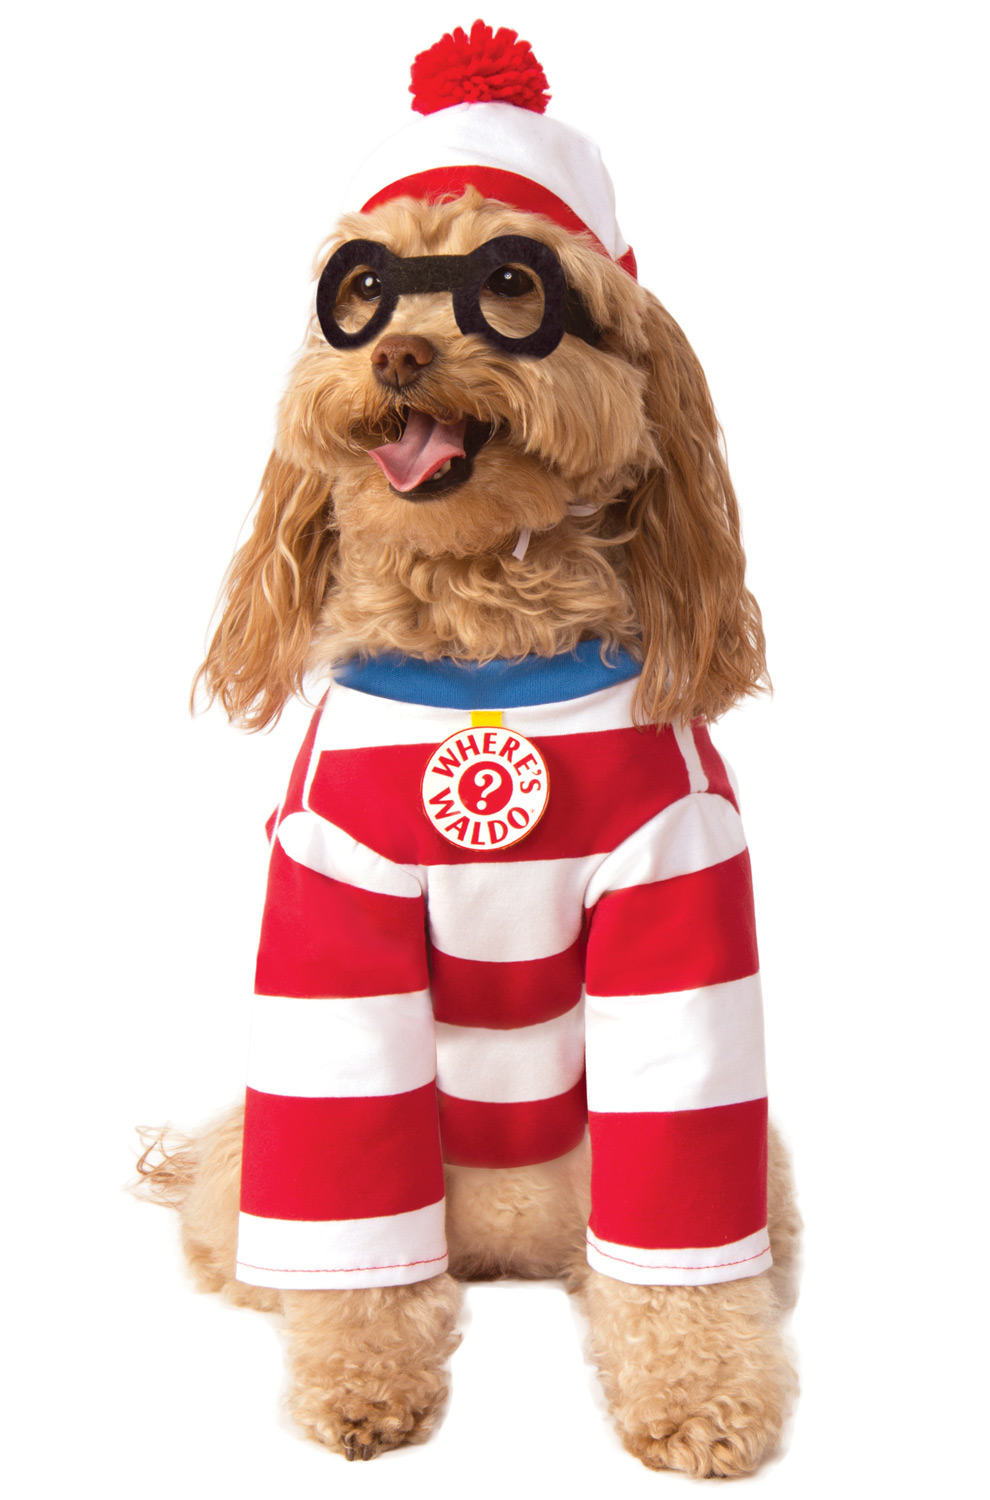 WHERE'S WALDO COSTUME FOR LARGE DOGS